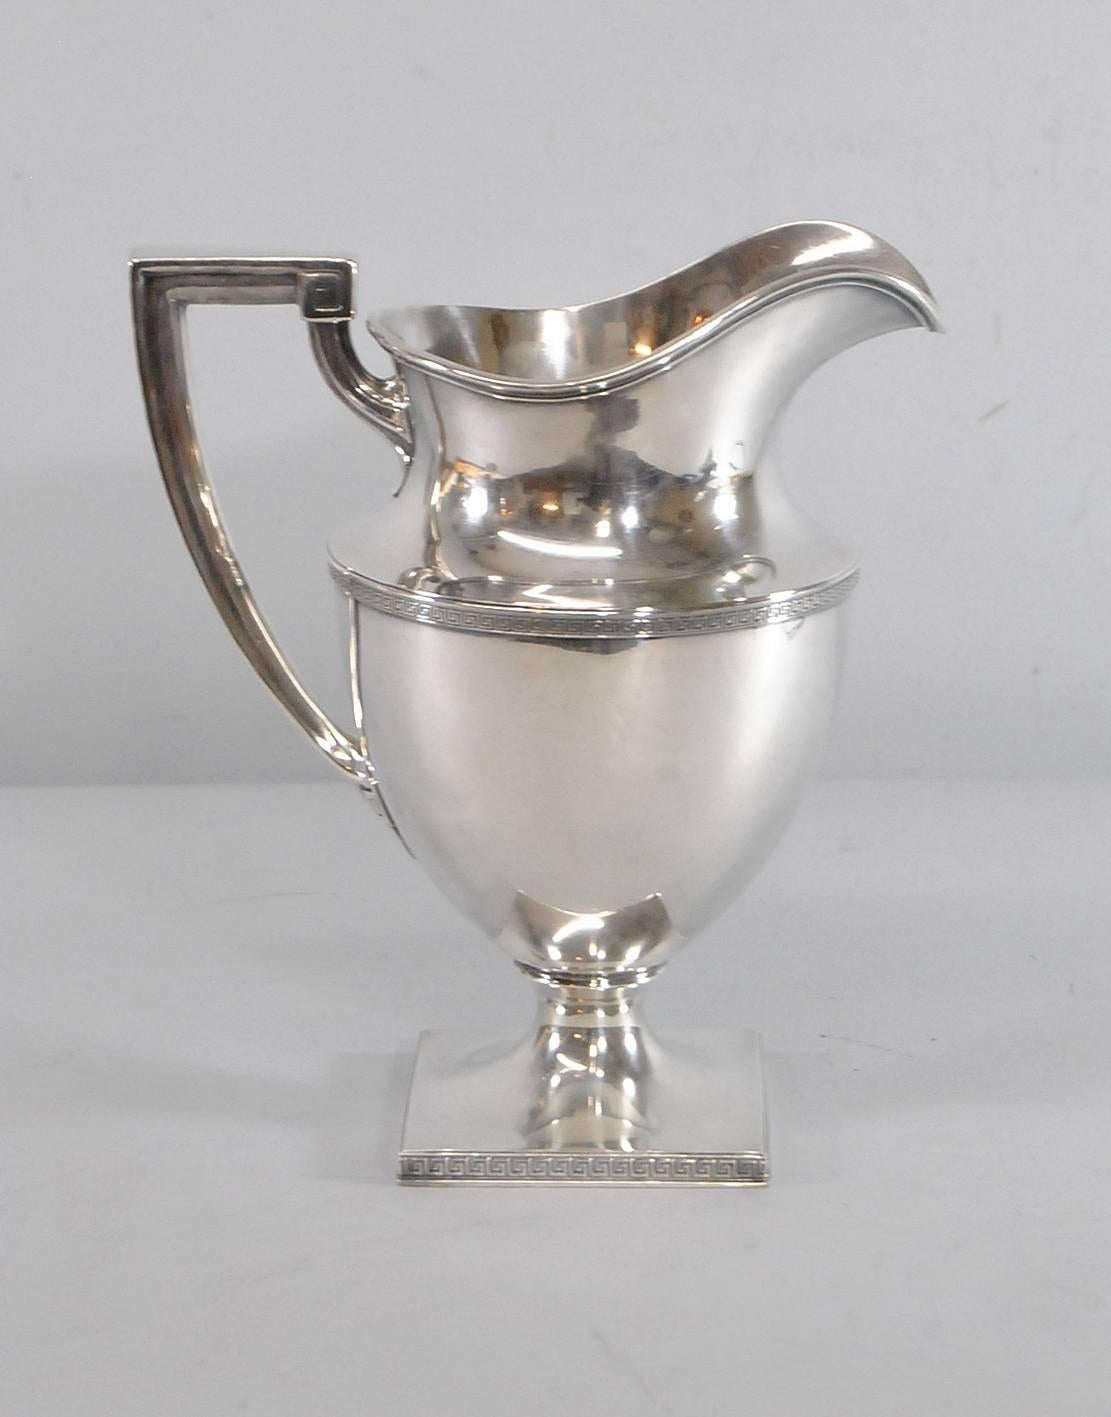 A great four pint water pitcher by Gorham in the Etruscan pattern. Great detailing with Roman key trim at base and middle of body. Roman key accents the handle. An elegant piece that is 10" tall and weighs 997.5 grams.